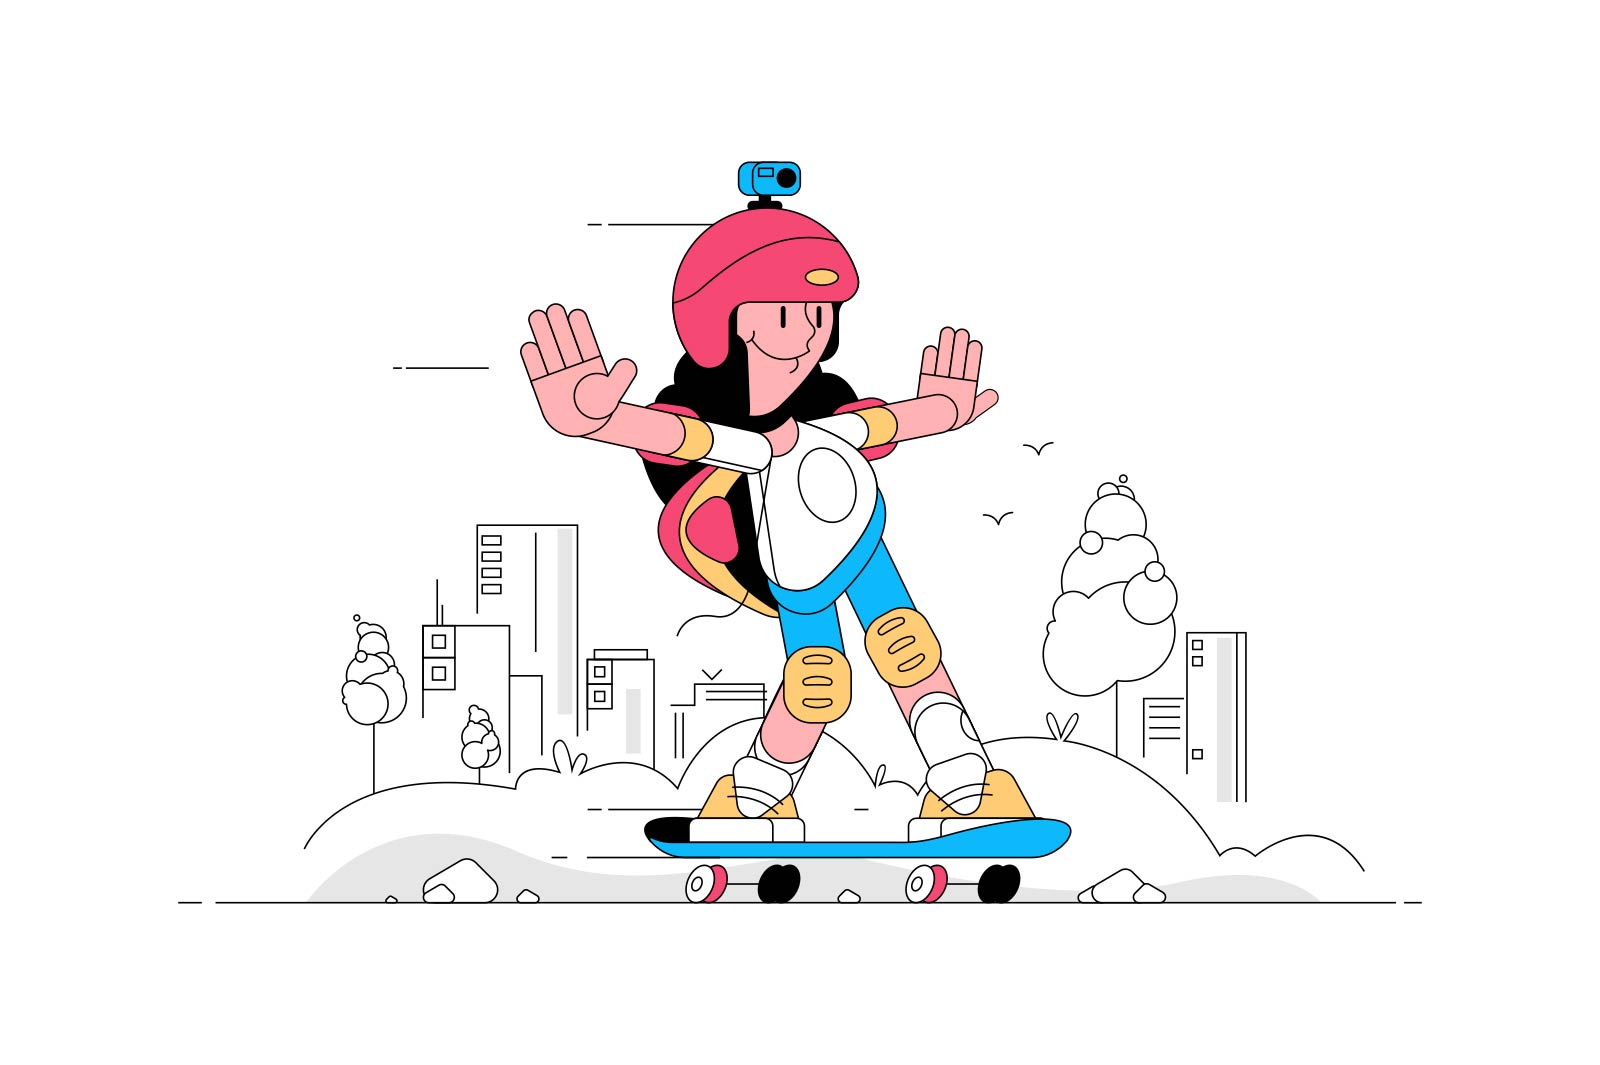 Teen on skate vector illustration. Happy teenager having fun on skateboard flat style. Camera on head. Girl wearing protective equipment. Hobby and active lifestyle concept. Isolated on white background